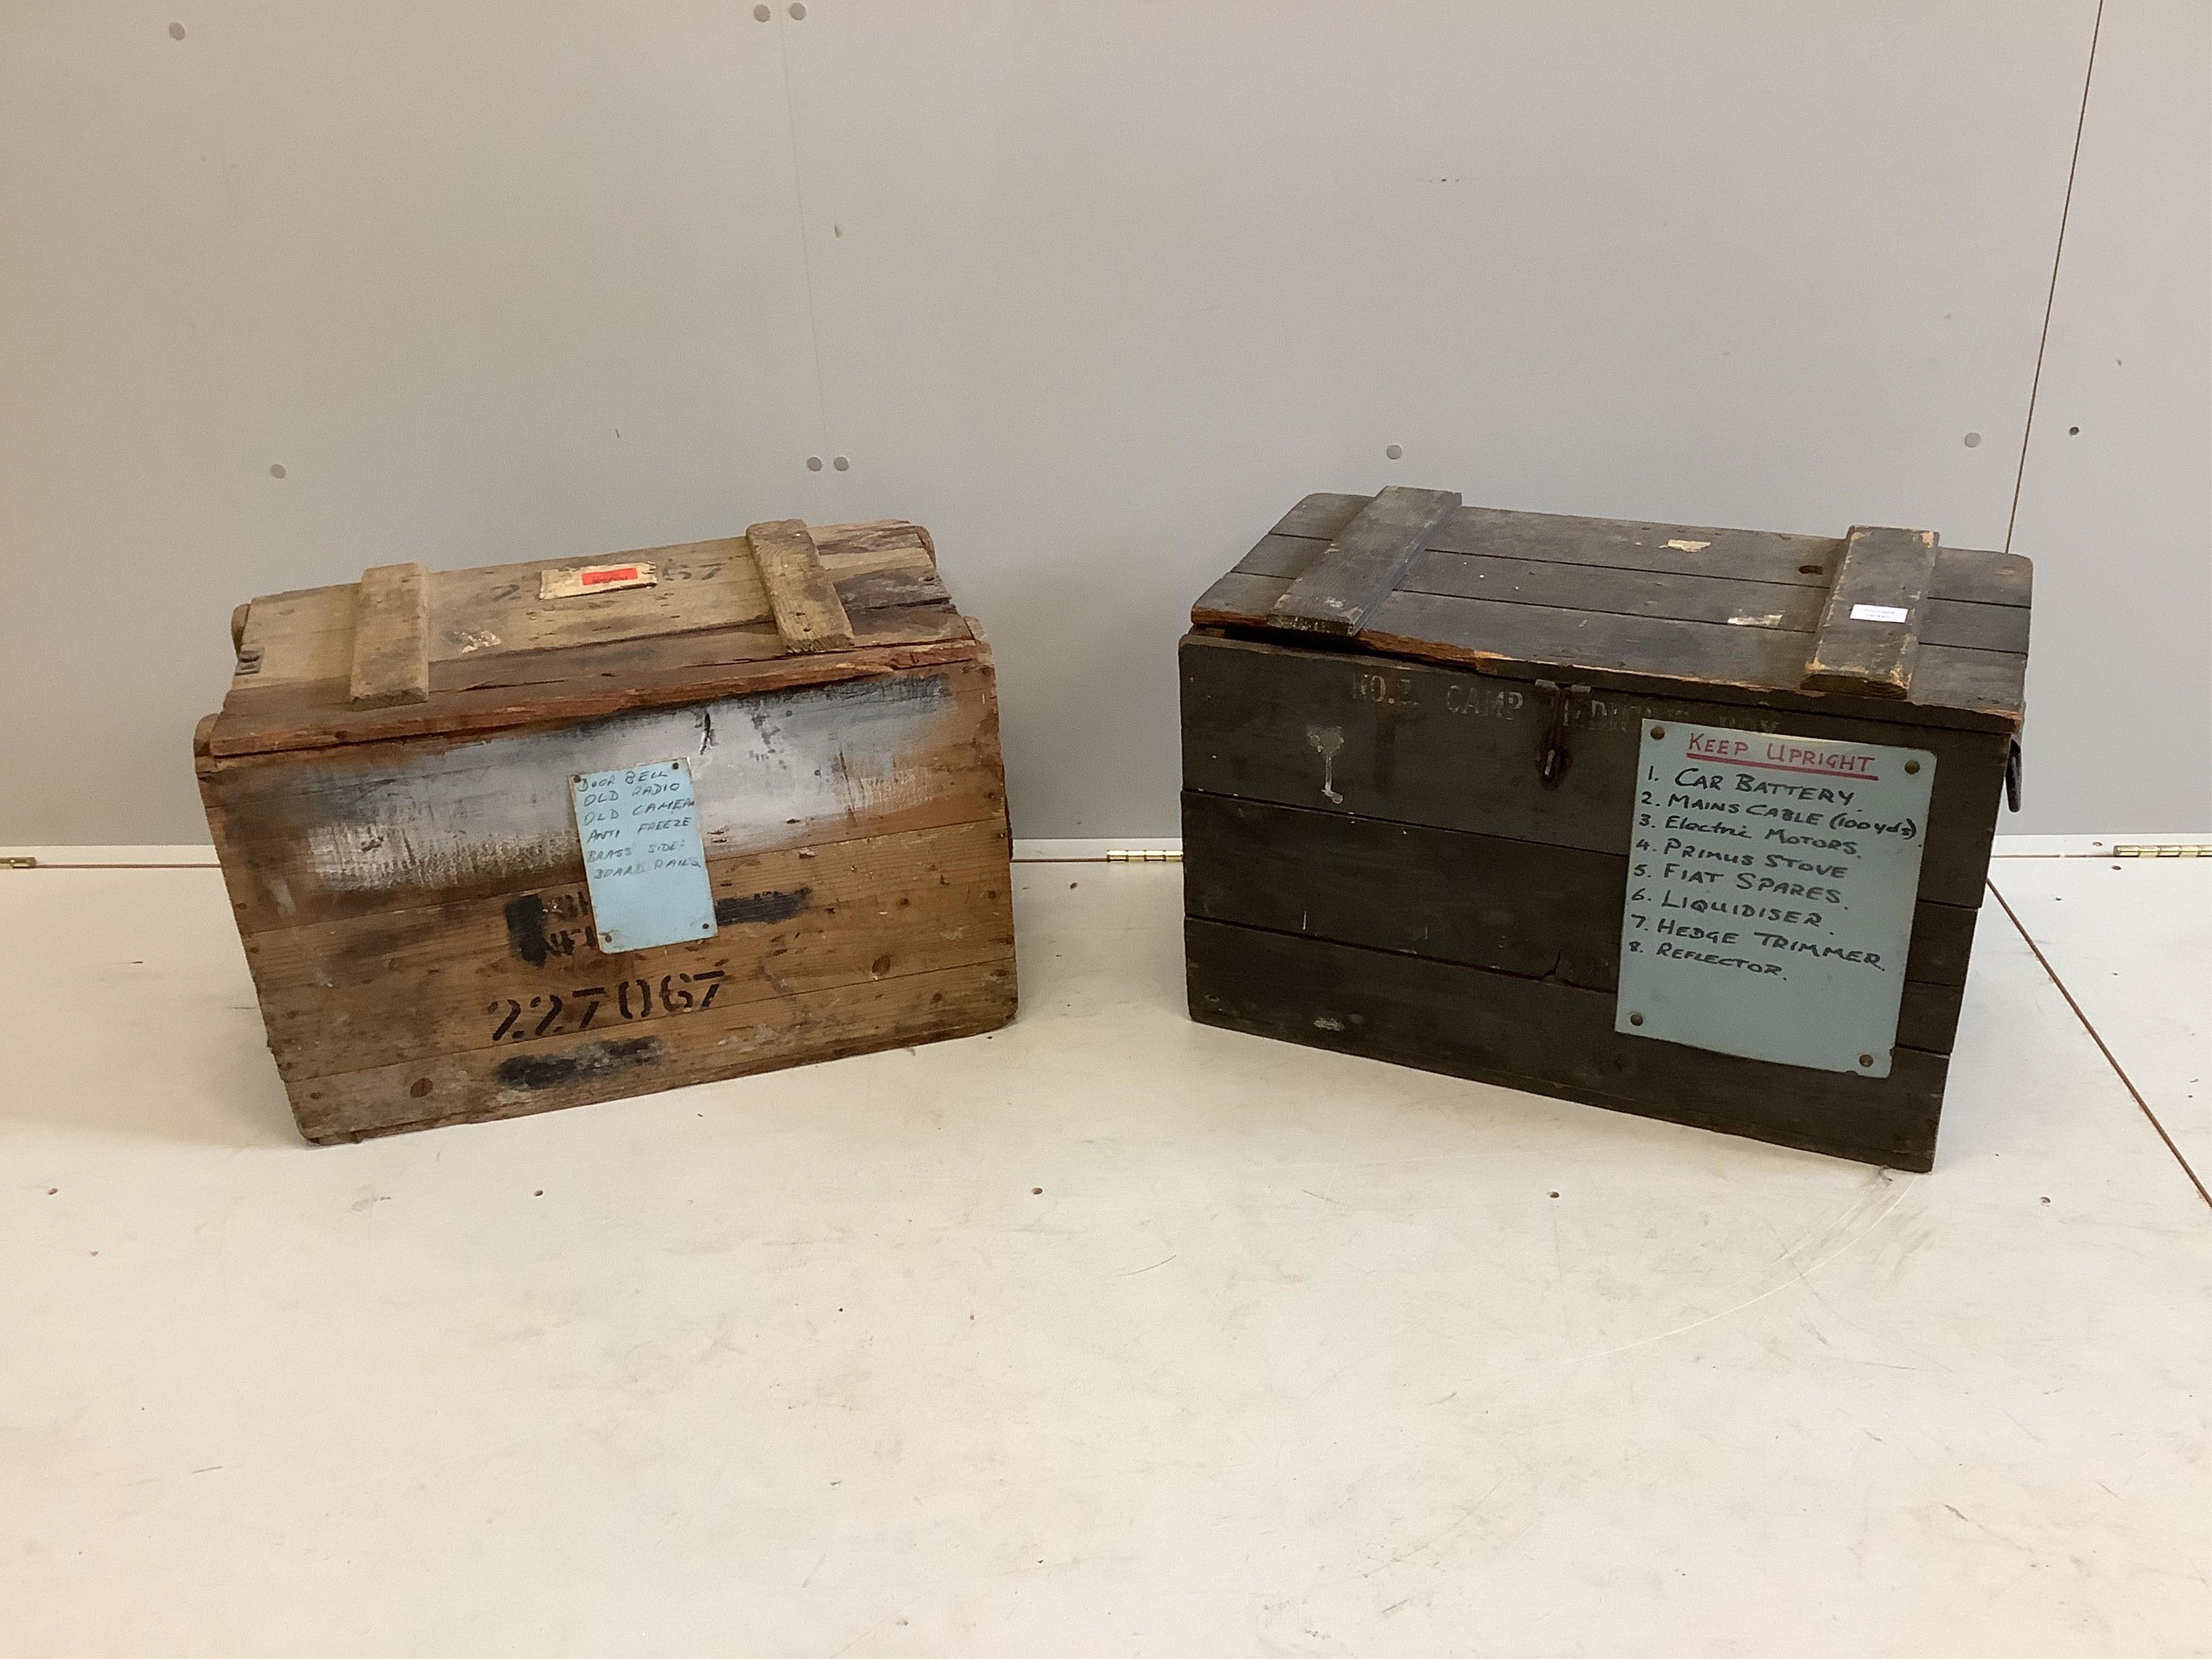 Two vintage Red Cross boxes, width 66cm, depth 38cm, height 44cm. Condition - poor